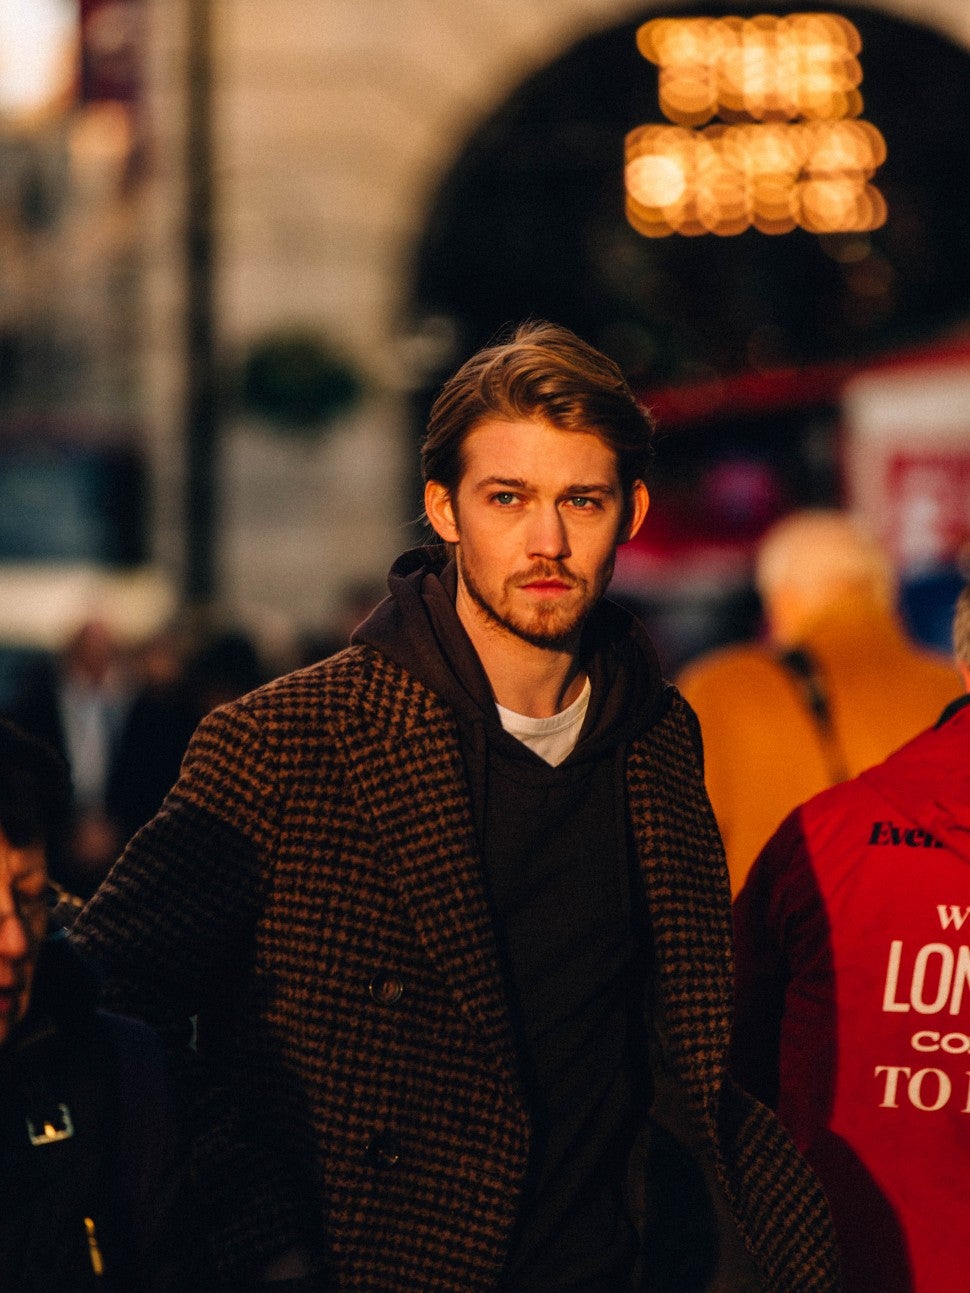 Joe Alwyn Reacts To Fans Thinking Hes Strangely Private